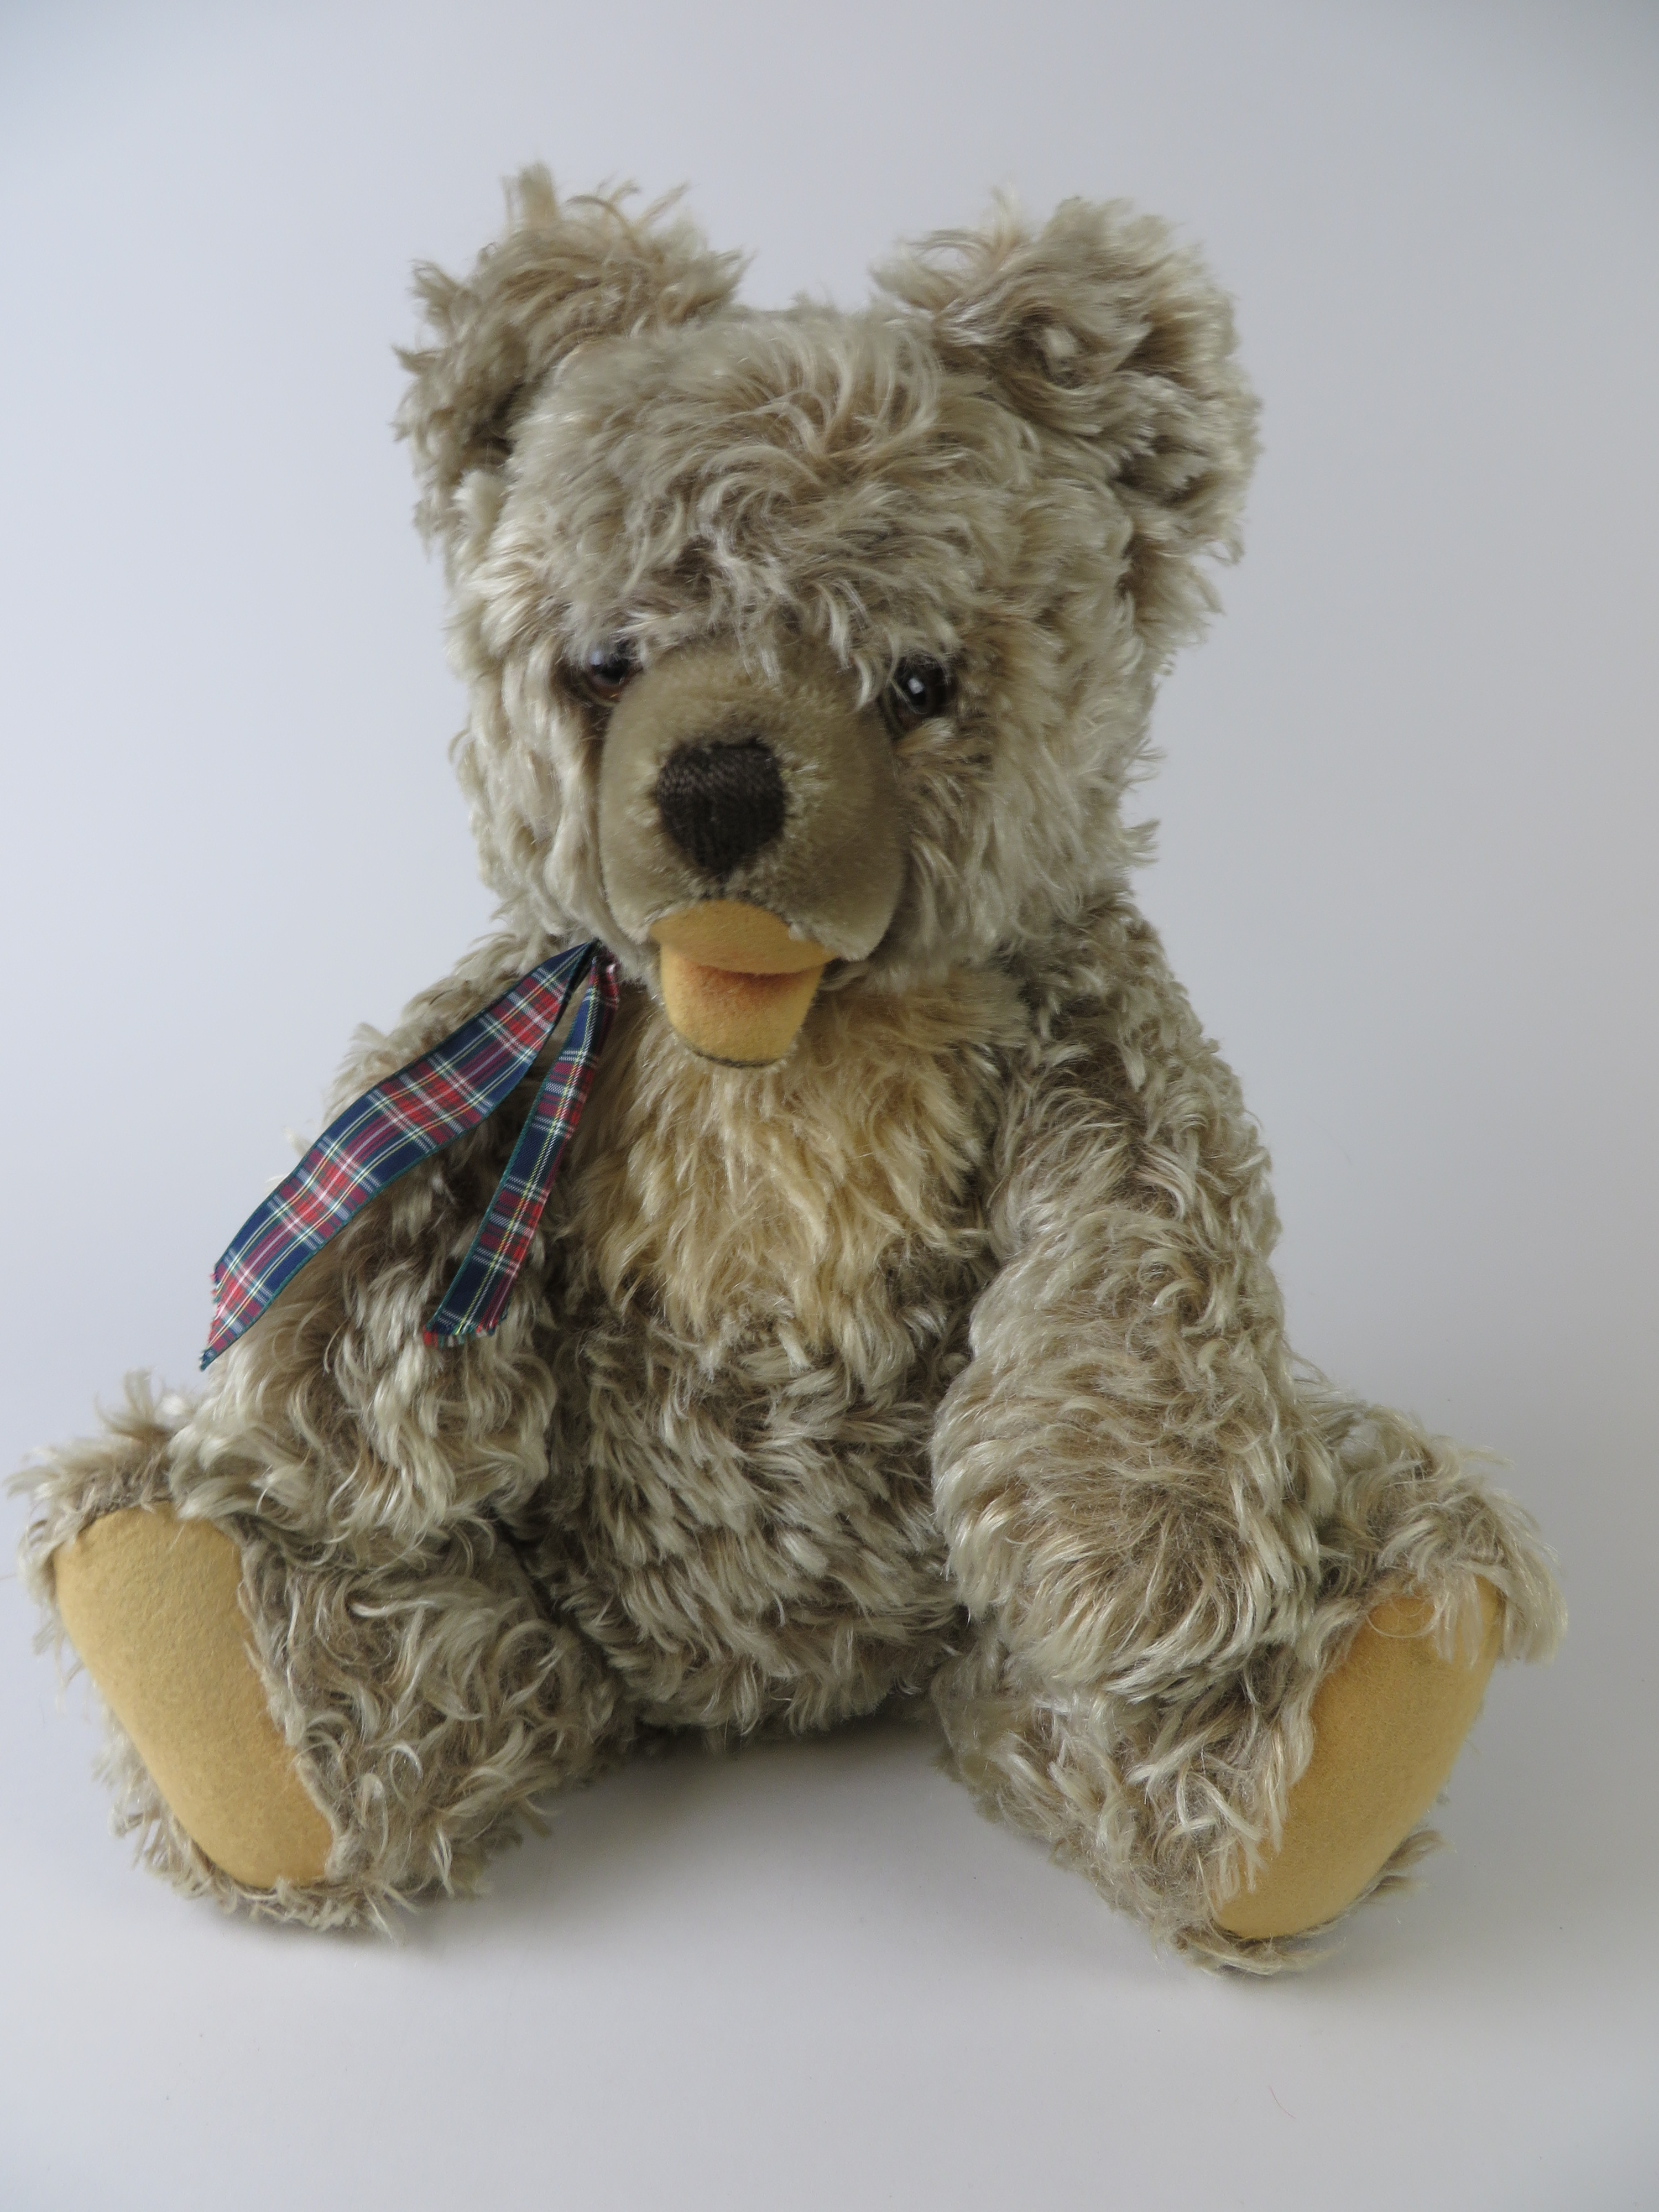 A Steiff Zotti Teddy Bear with button in ear and characteristic open mouth. With growler. Very